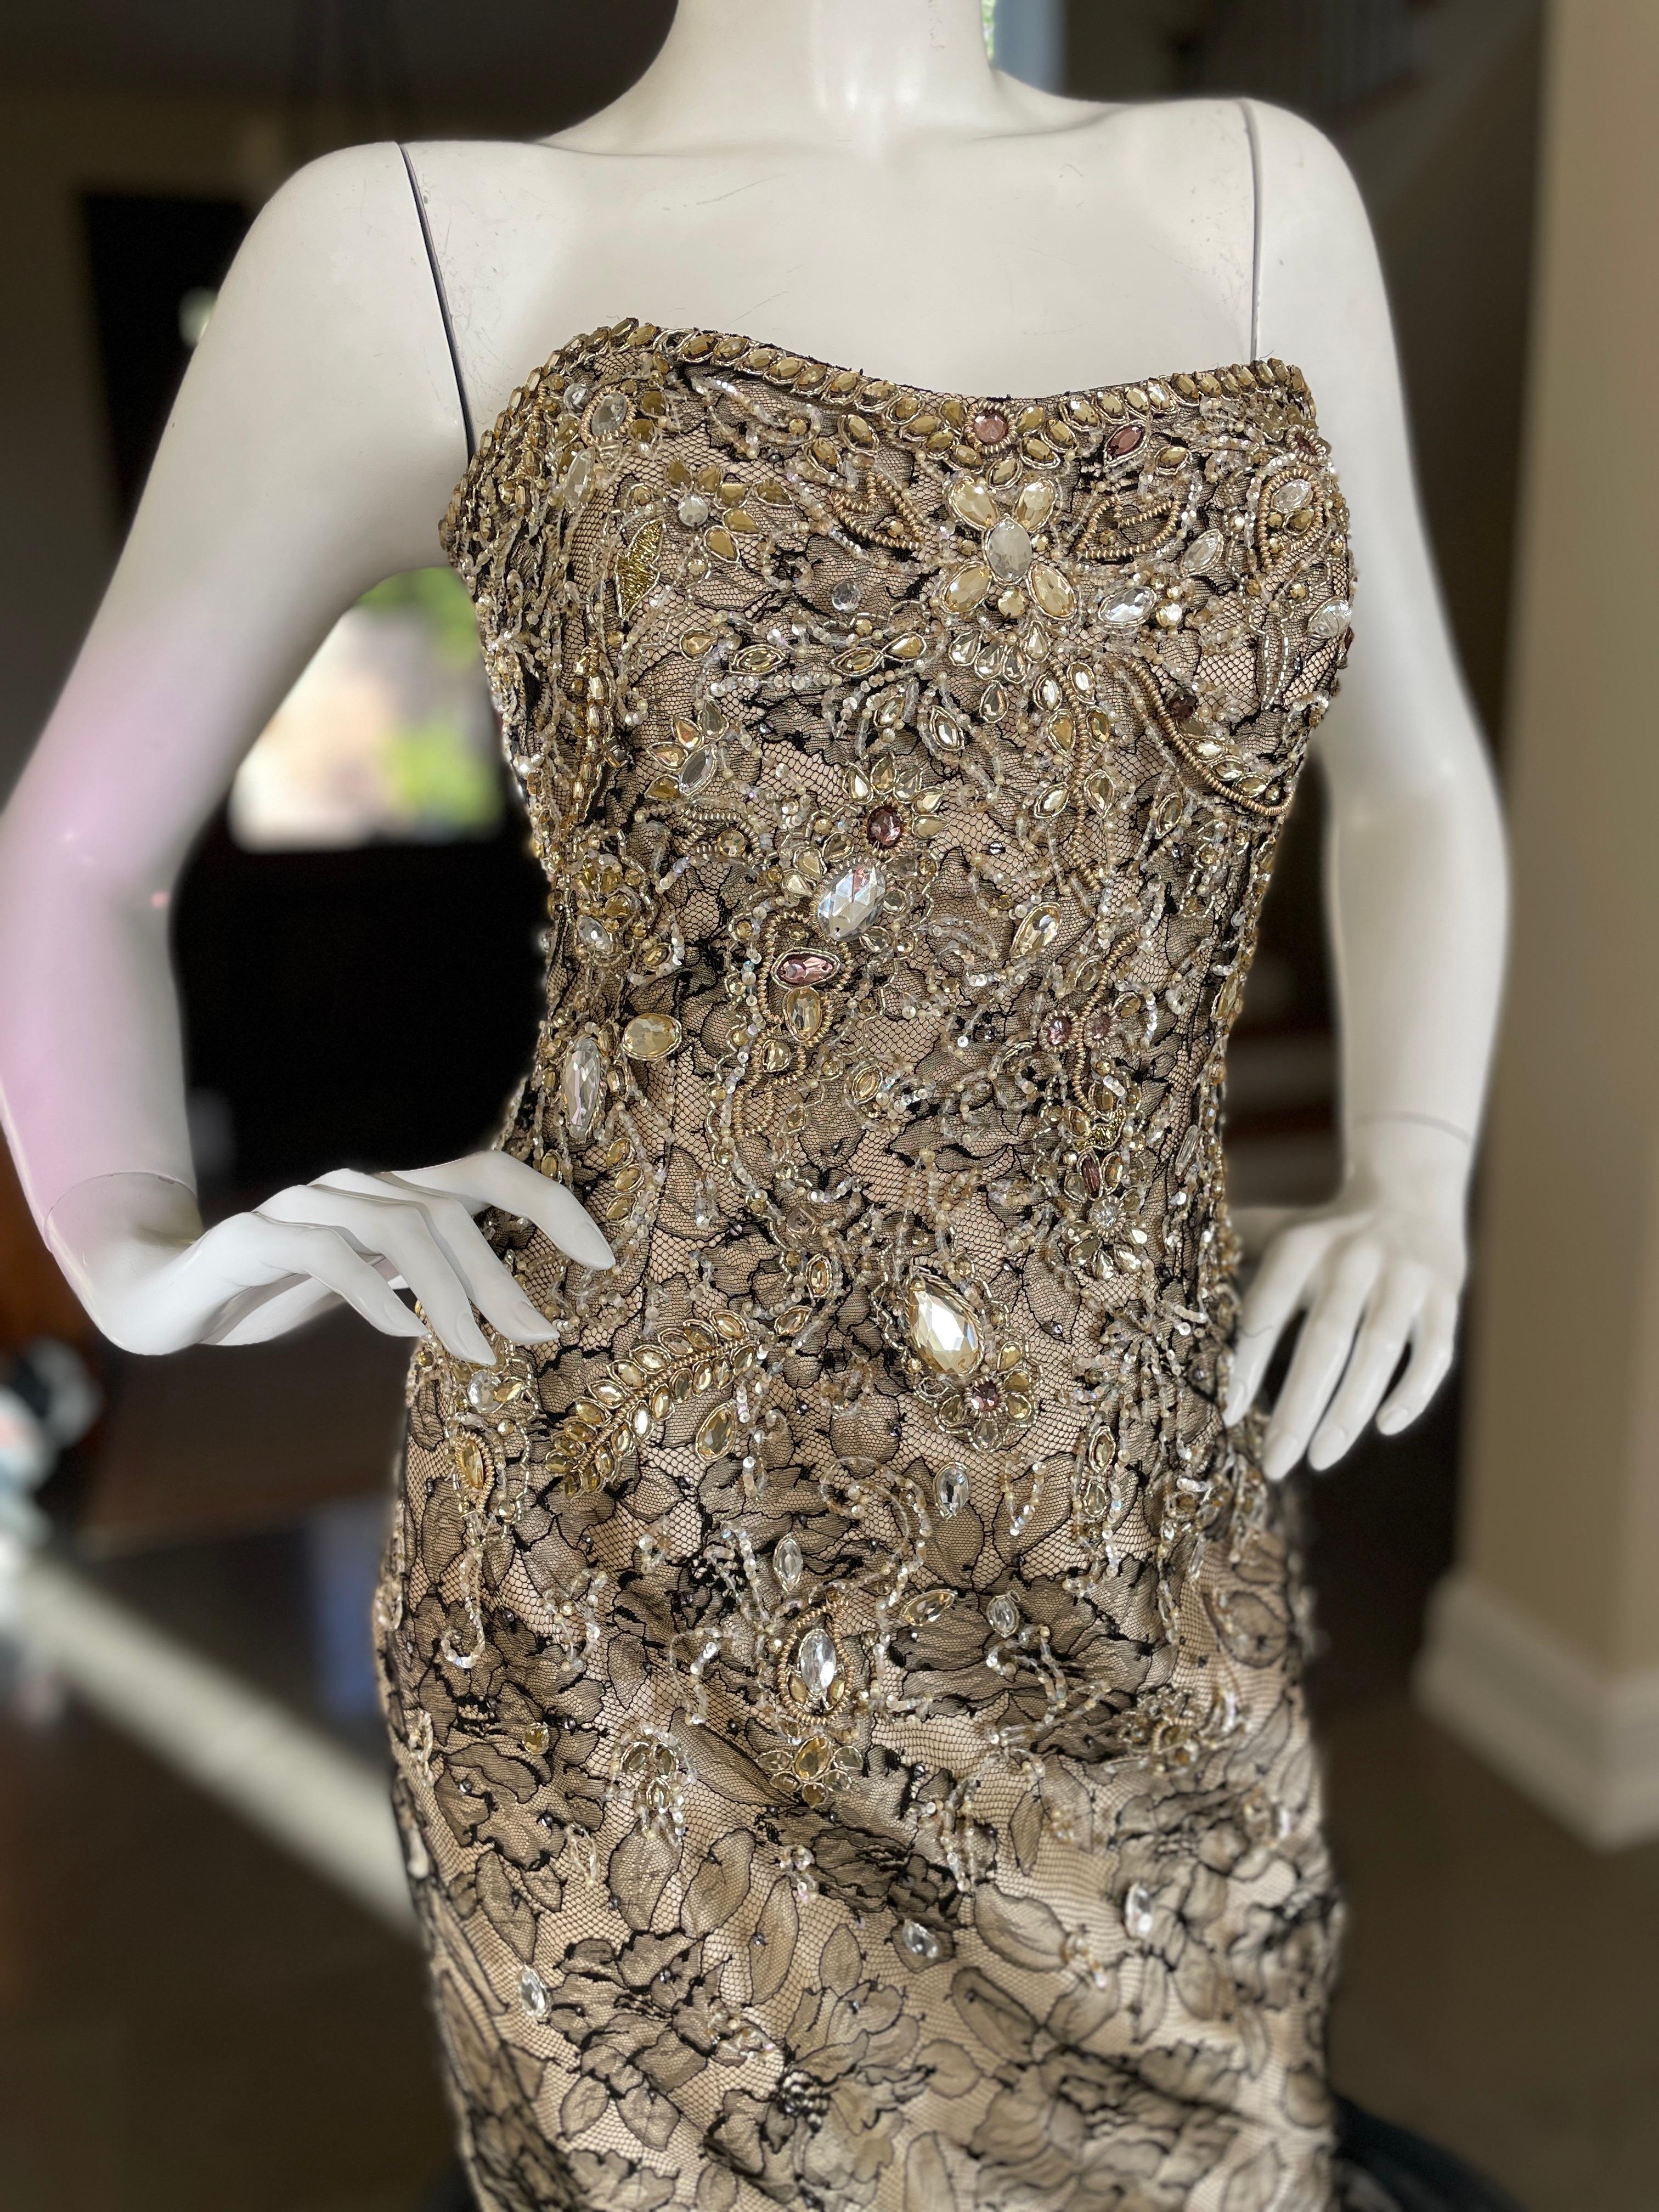  Roland Nivelais Strapless Vintage Jewel Embellished Silk Mermaid Dress  In Excellent Condition For Sale In Cloverdale, CA